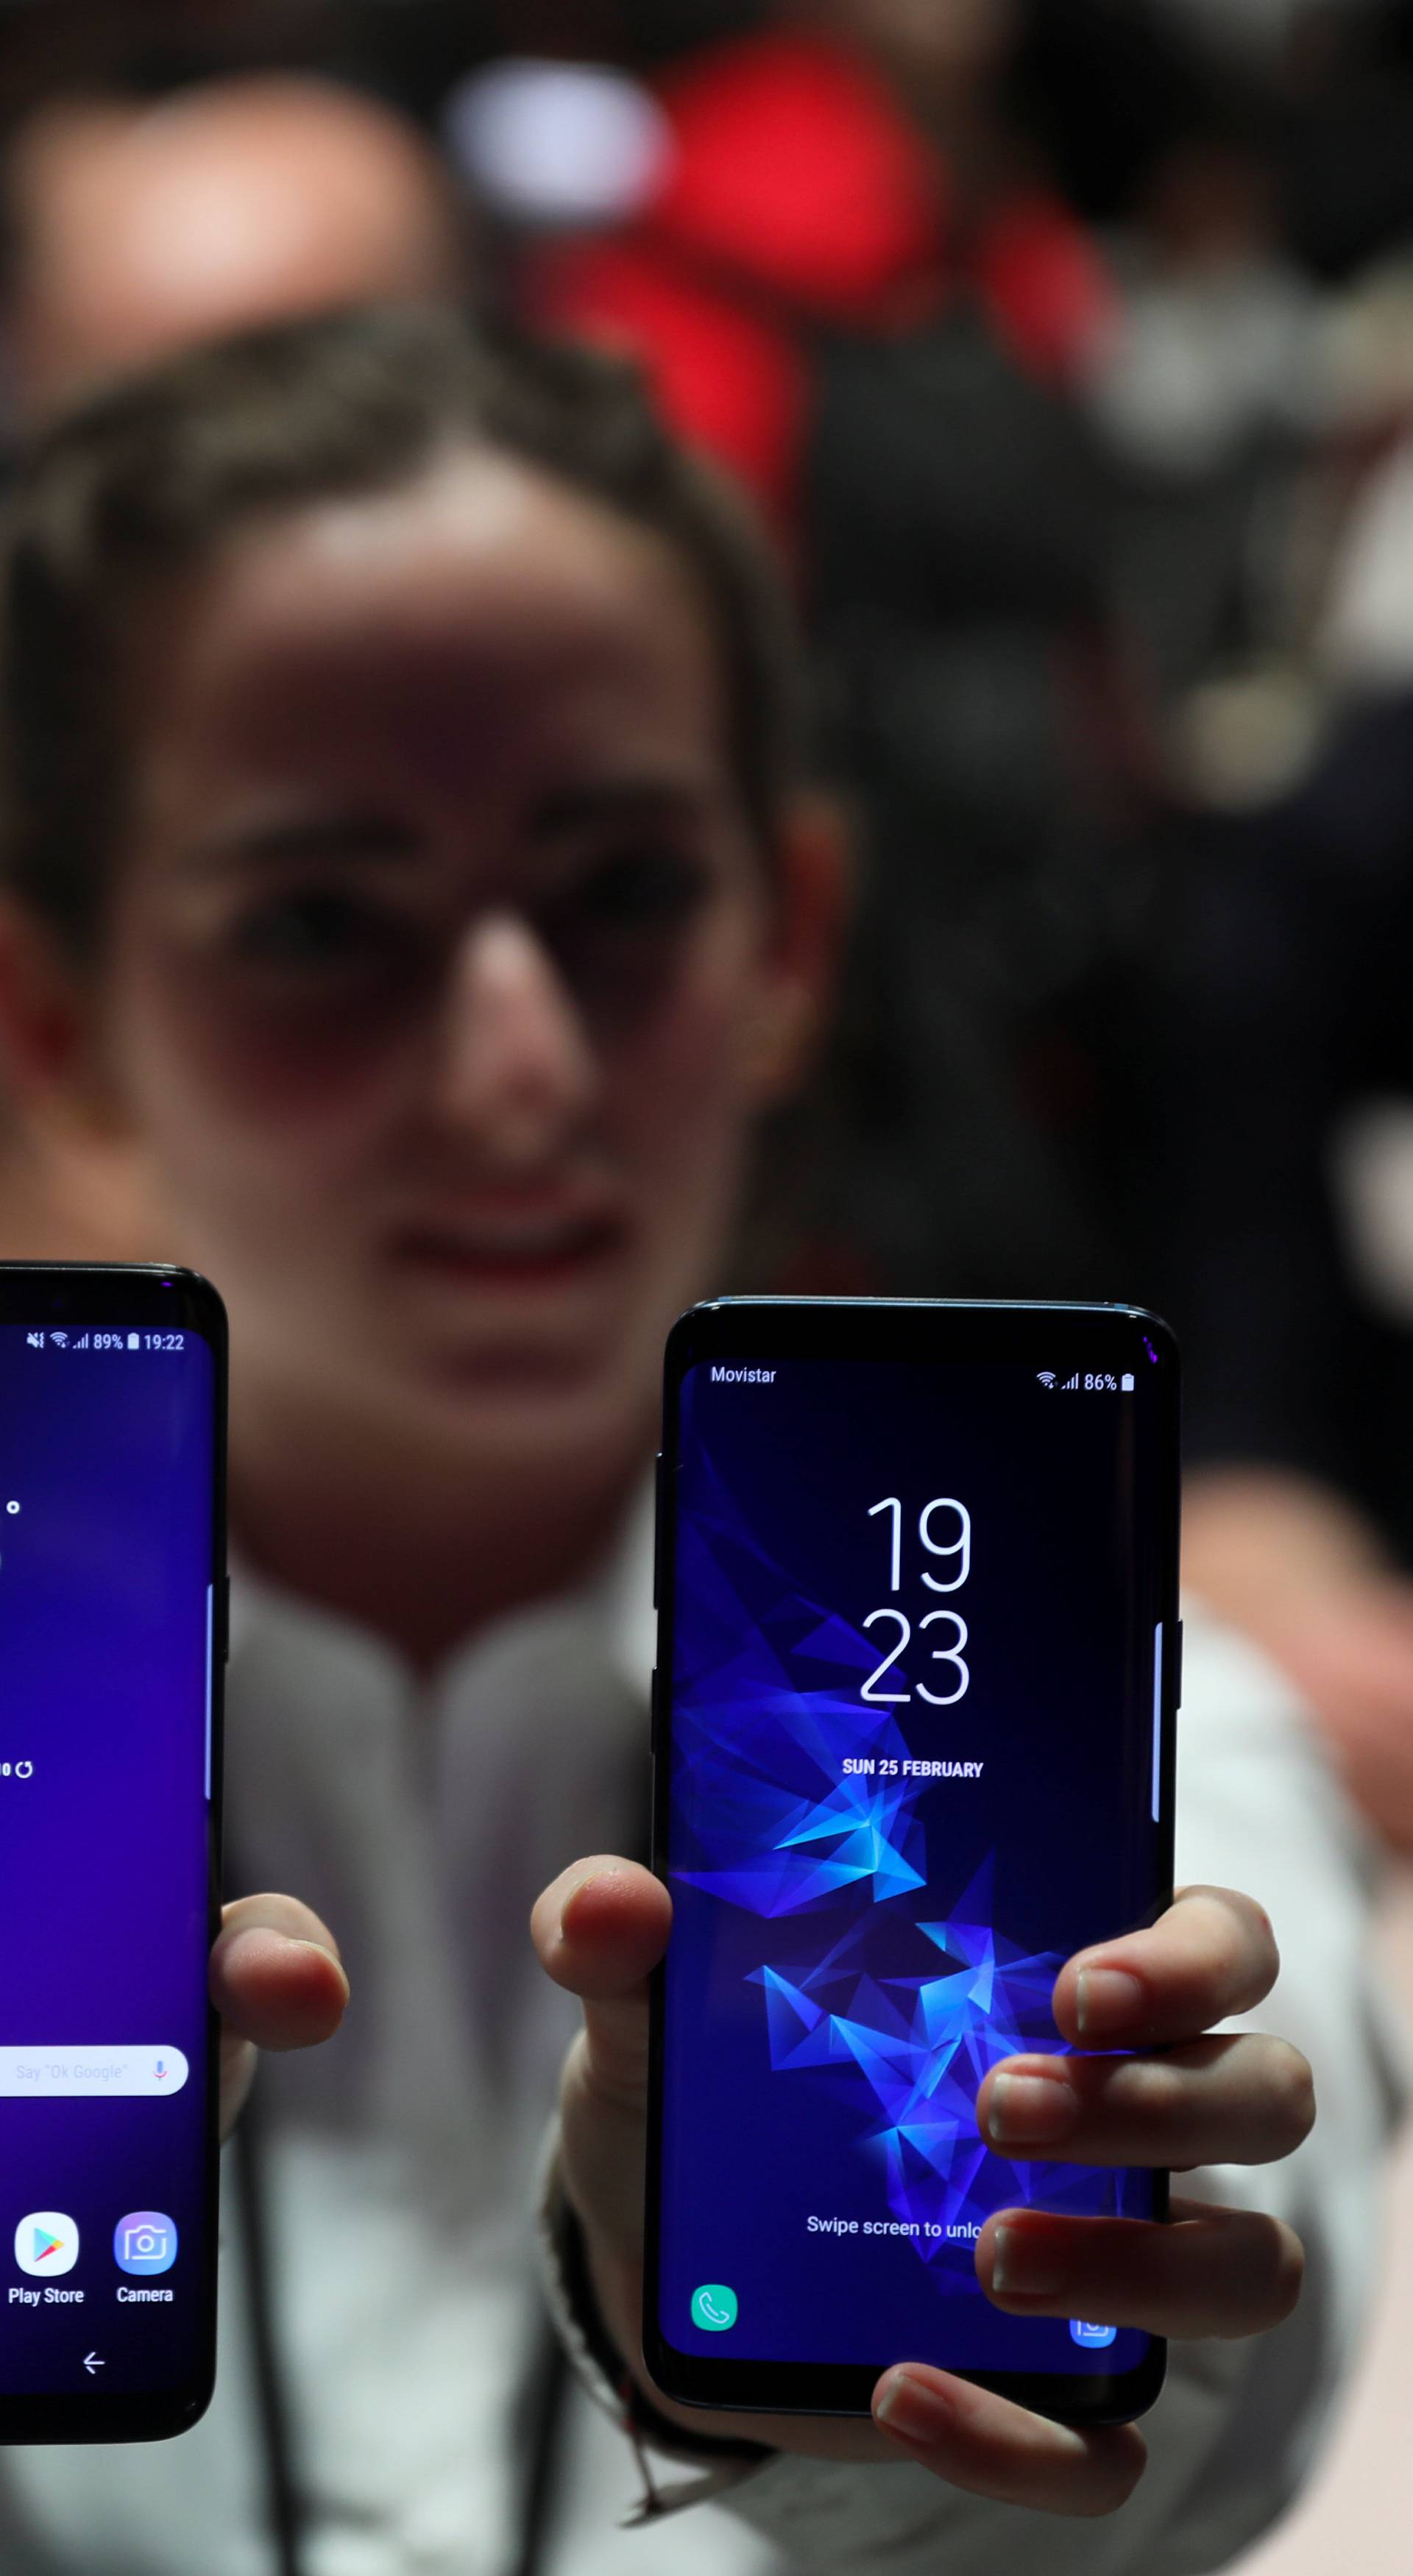 A hostess shows up Samsung's new S9 (R) and S9 Plus devices after a presentation ceremony at the Mobile World Congress in Barcelona